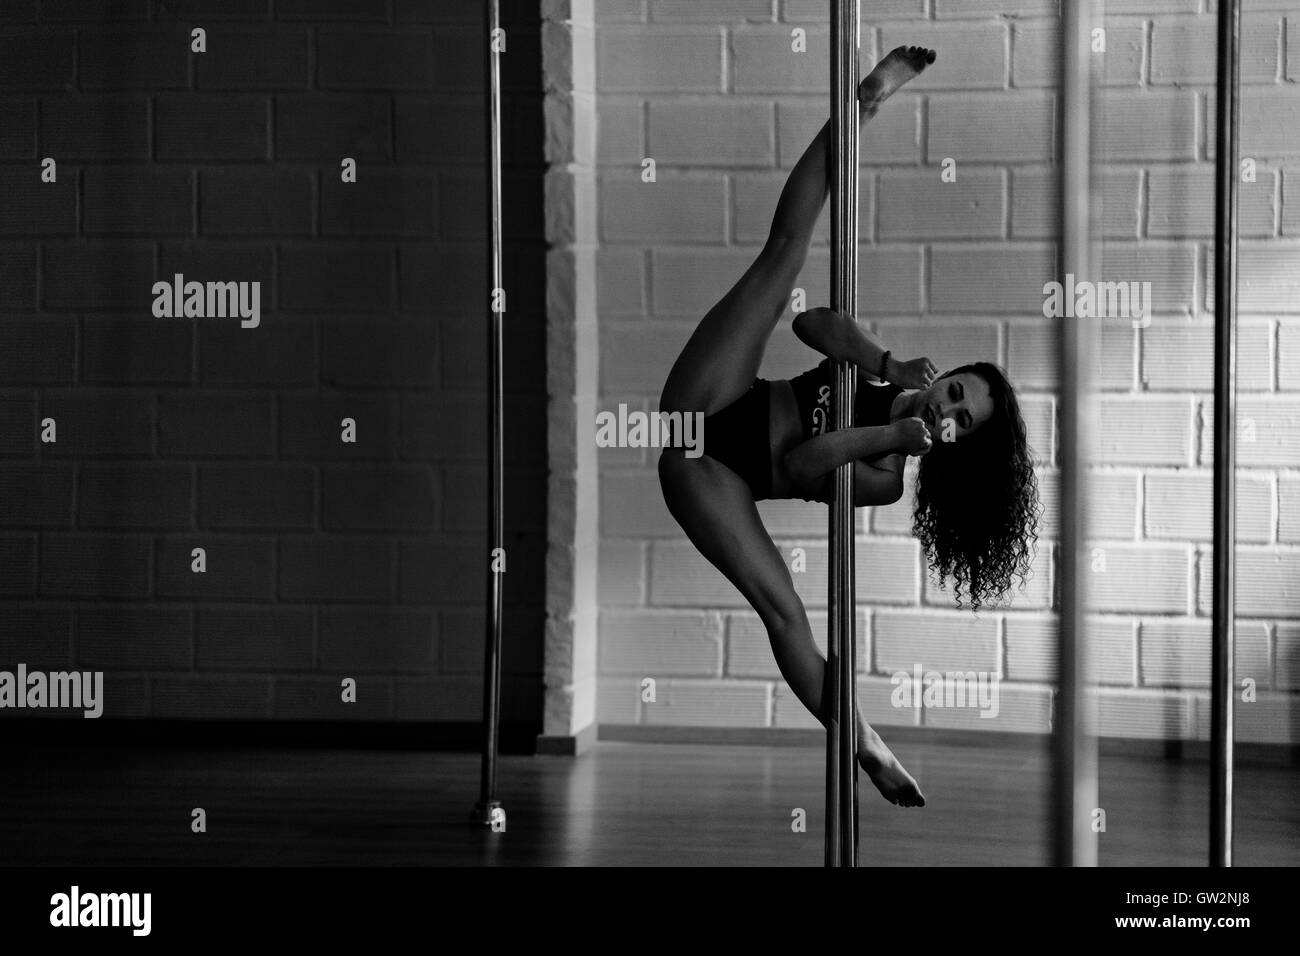 Carolina Echavarria, a young Colombian pole dancer, grips a pole with her  forearms during a pole dance training session in Academia Pin Up in  Medellín, Colombia Stock Photo - Alamy